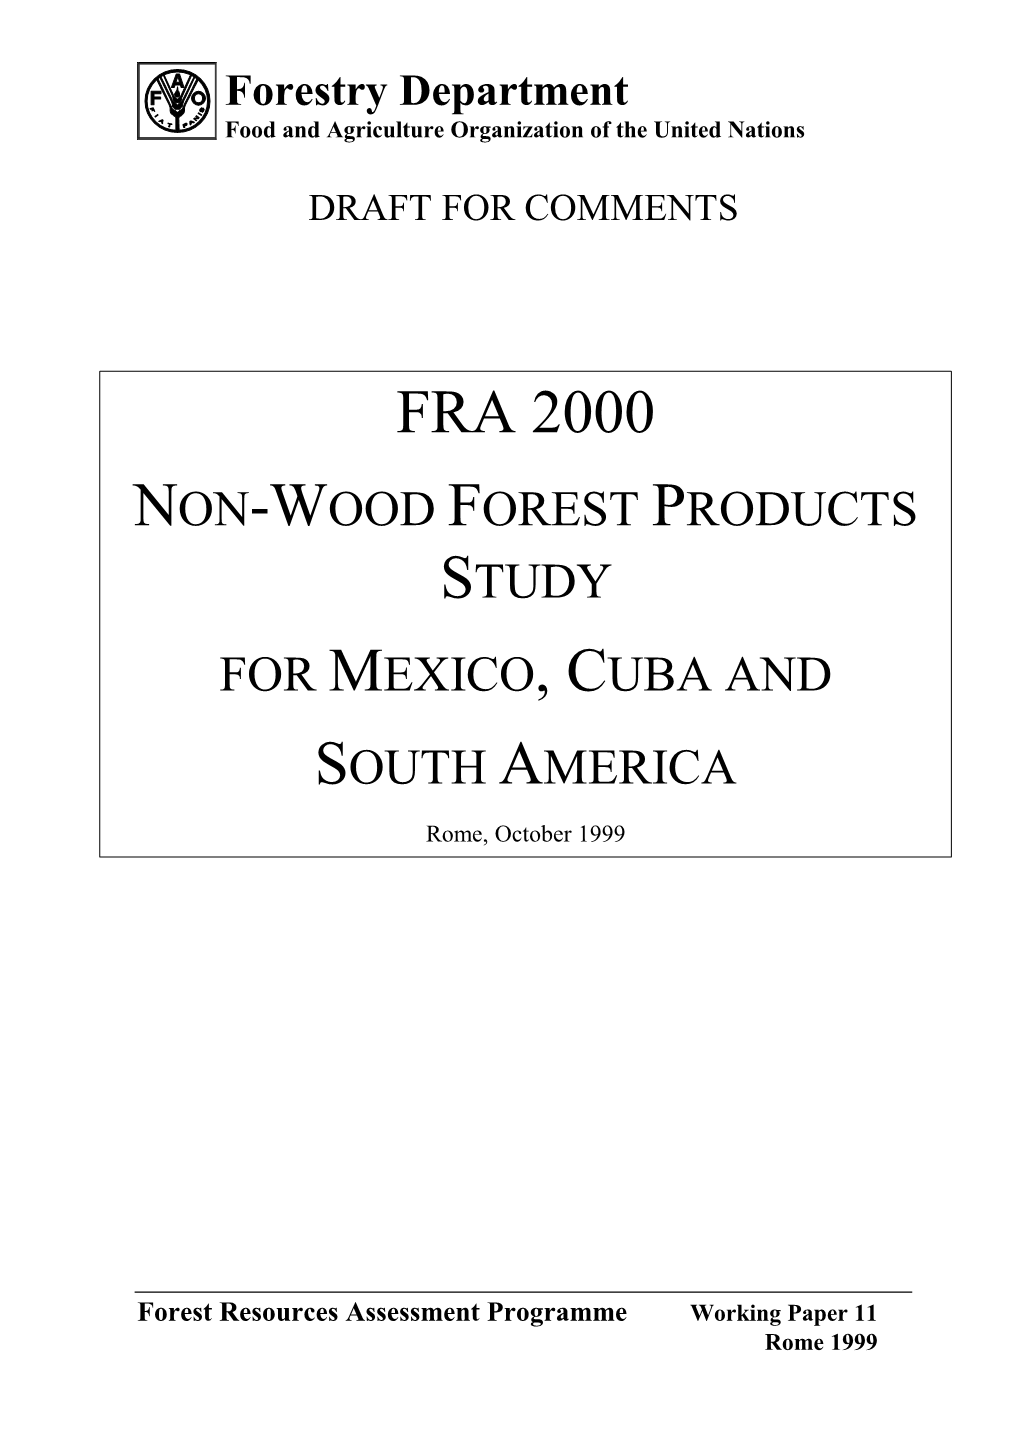 Fra 2000 Non-Wood Forest Products Study for Mexico, Cuba and South America